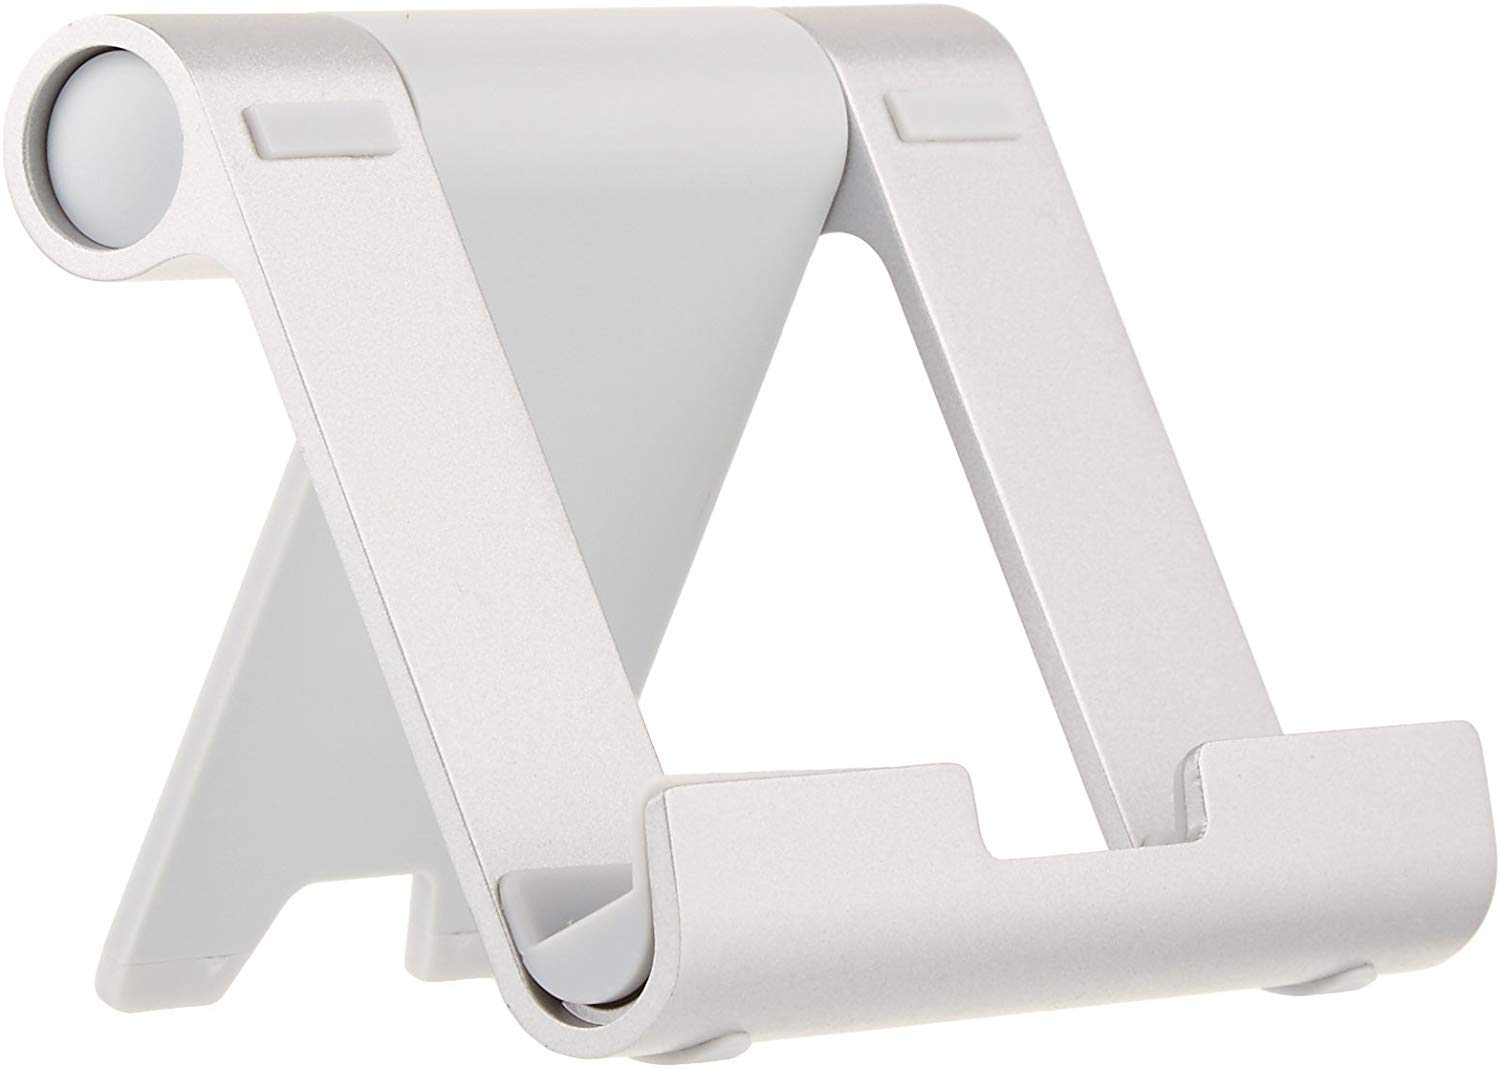 tablet stand - AmazoBasics Multi-Angle Portable Stand for Tablets